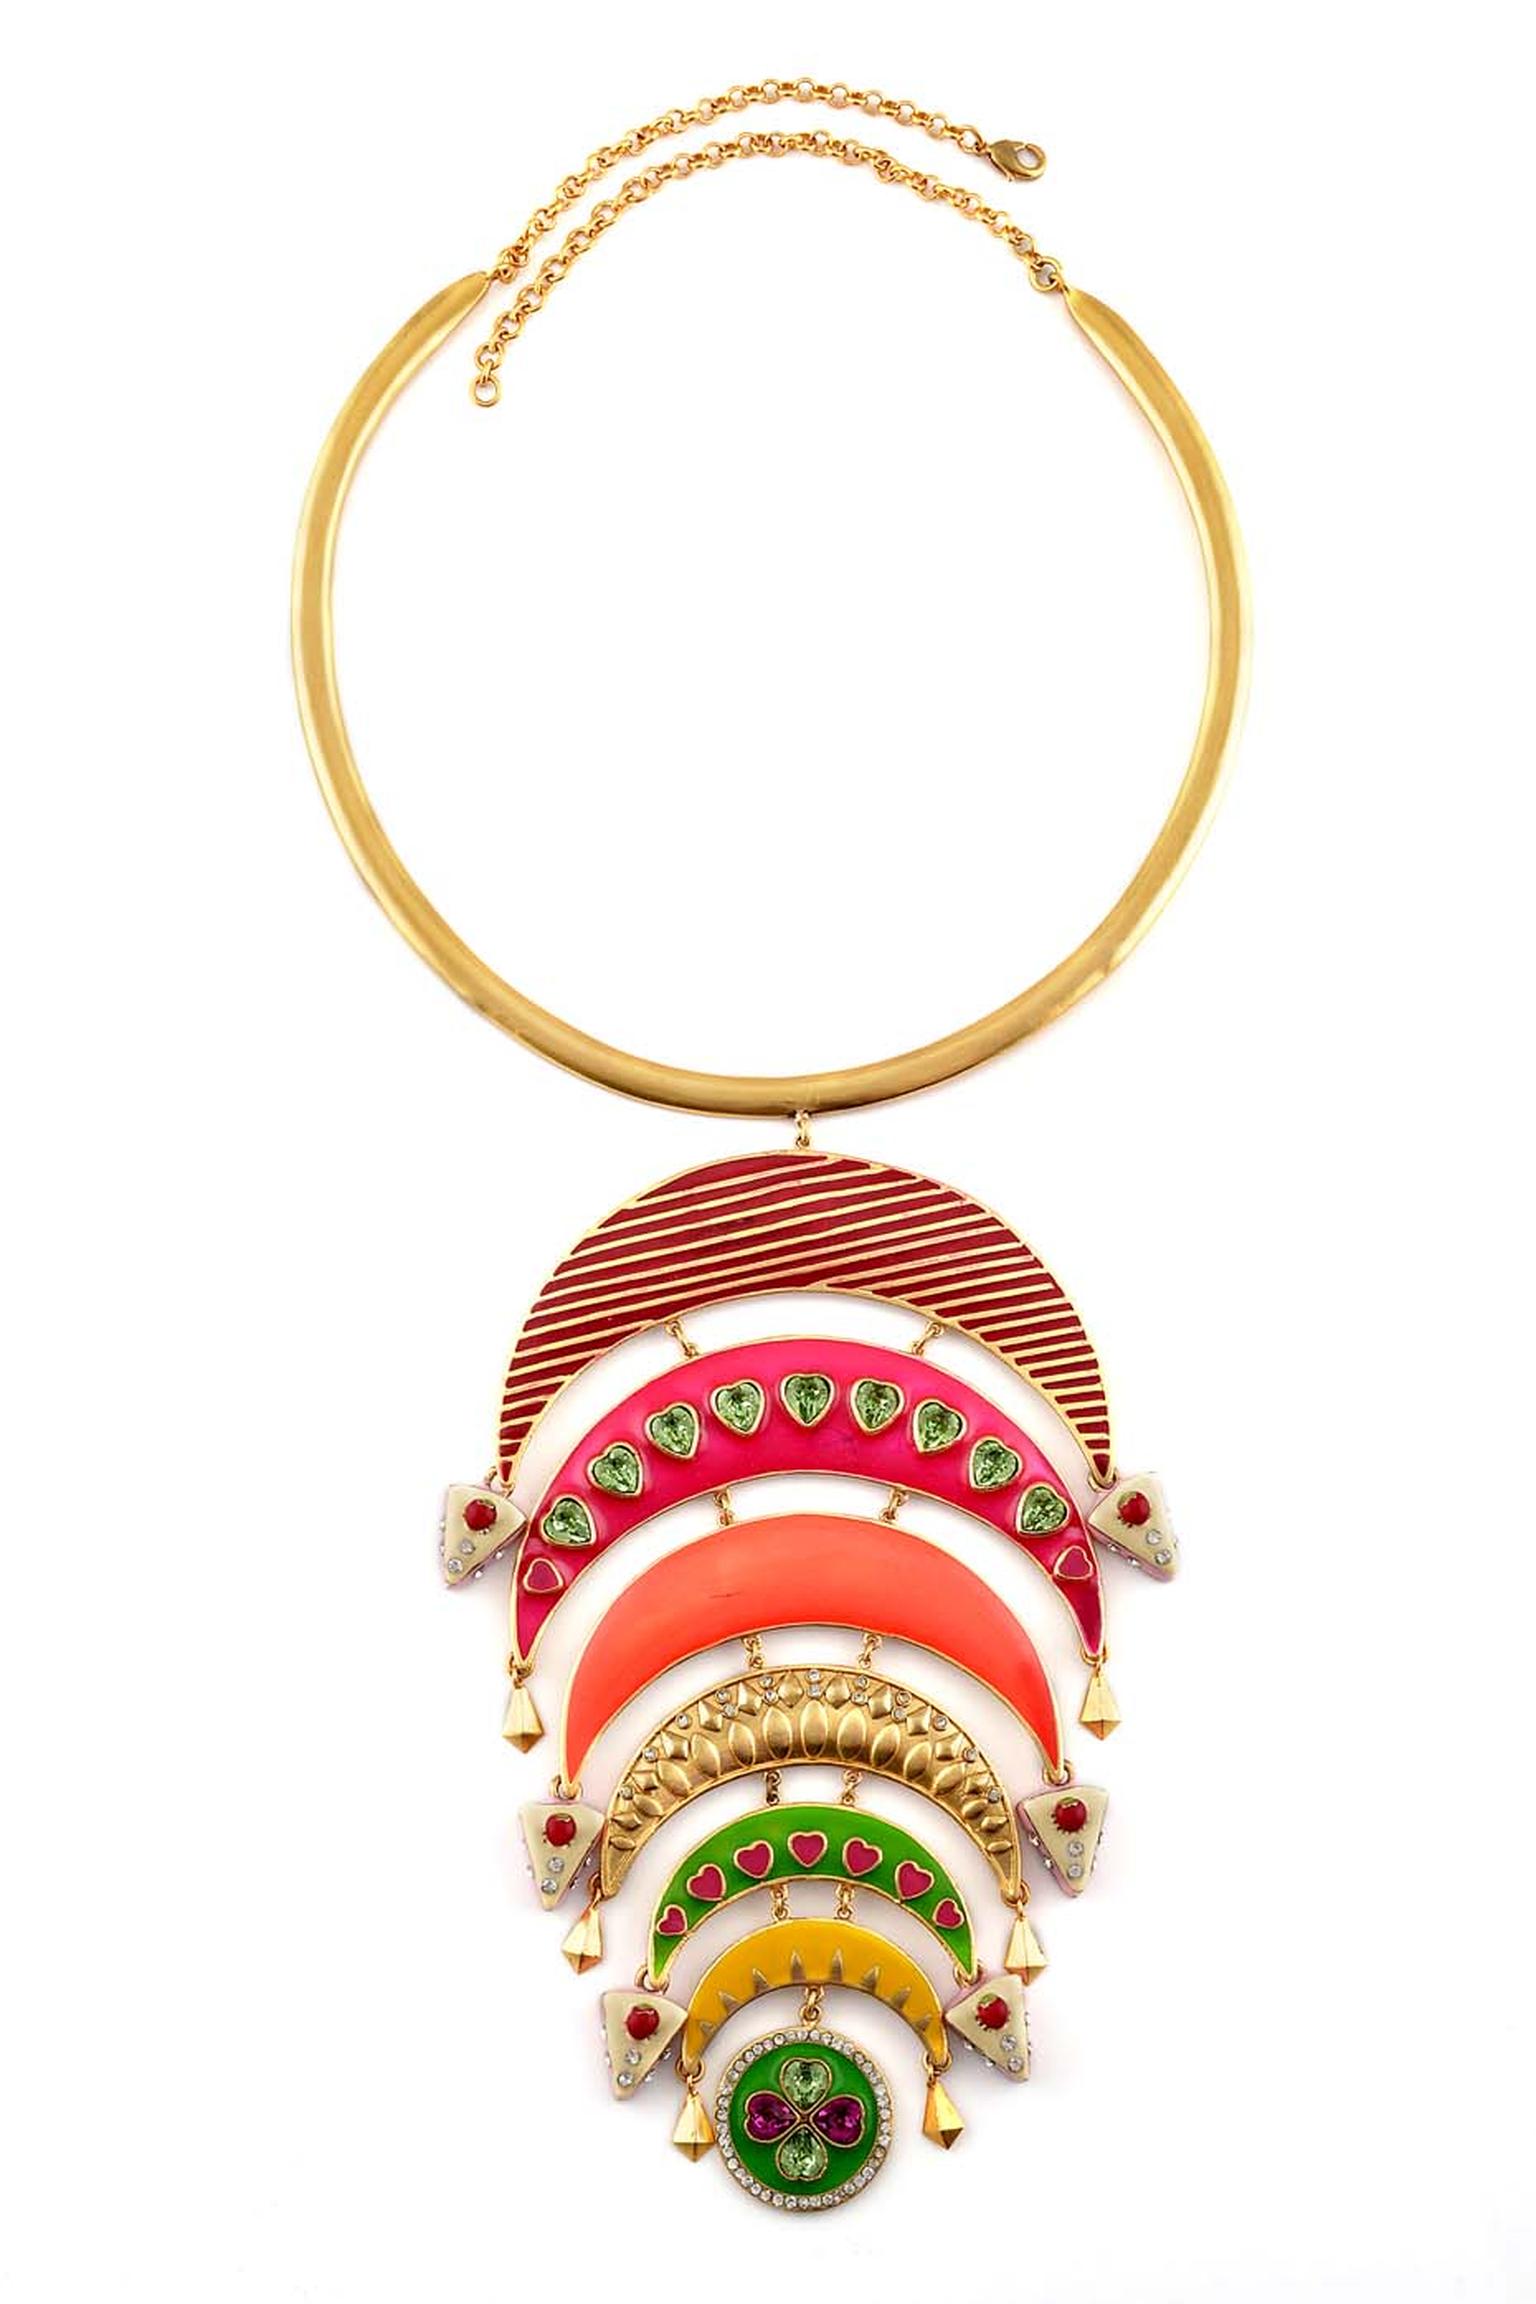 Amrapali and Manish Arora AW 2014-15 collection Jasper necklace.